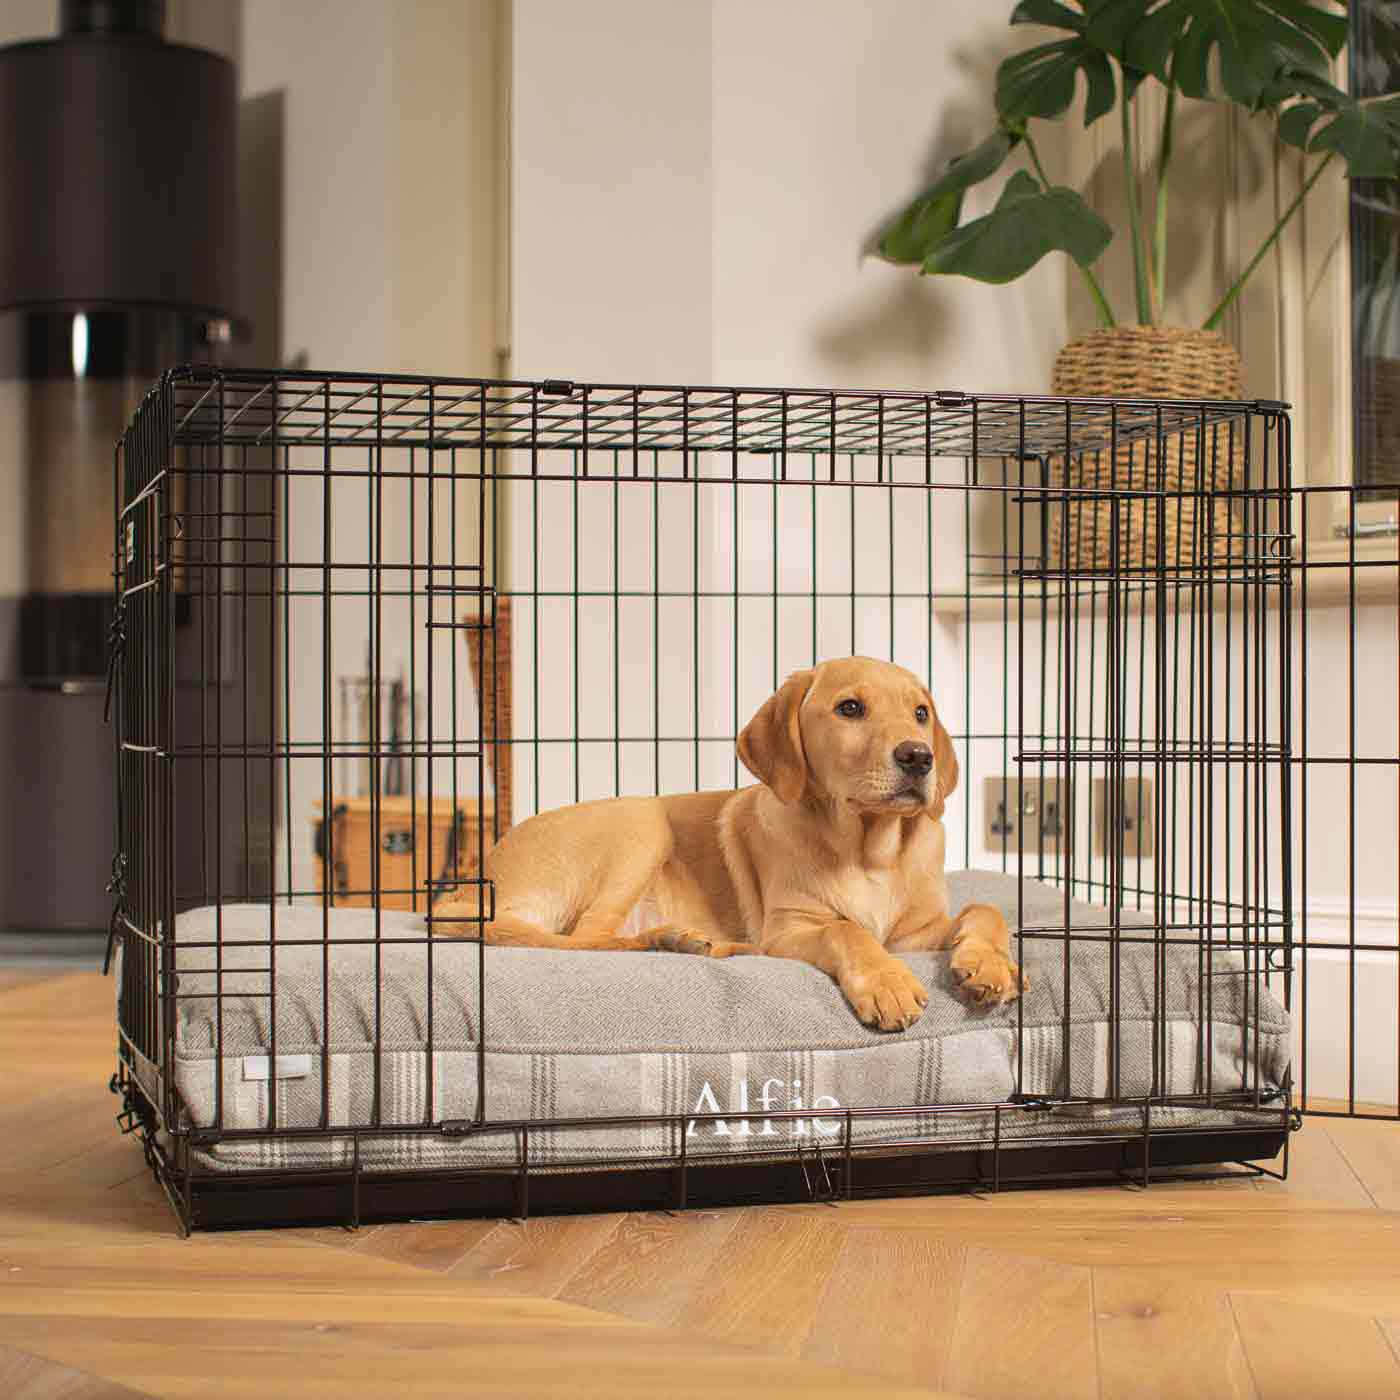 Luxury Dog Crate Cushion, Balmoral Dove Grey Tweed Crate Cushion The Perfect Dog Crate Accessory, Available To Personalise Now at Lords & Labradors